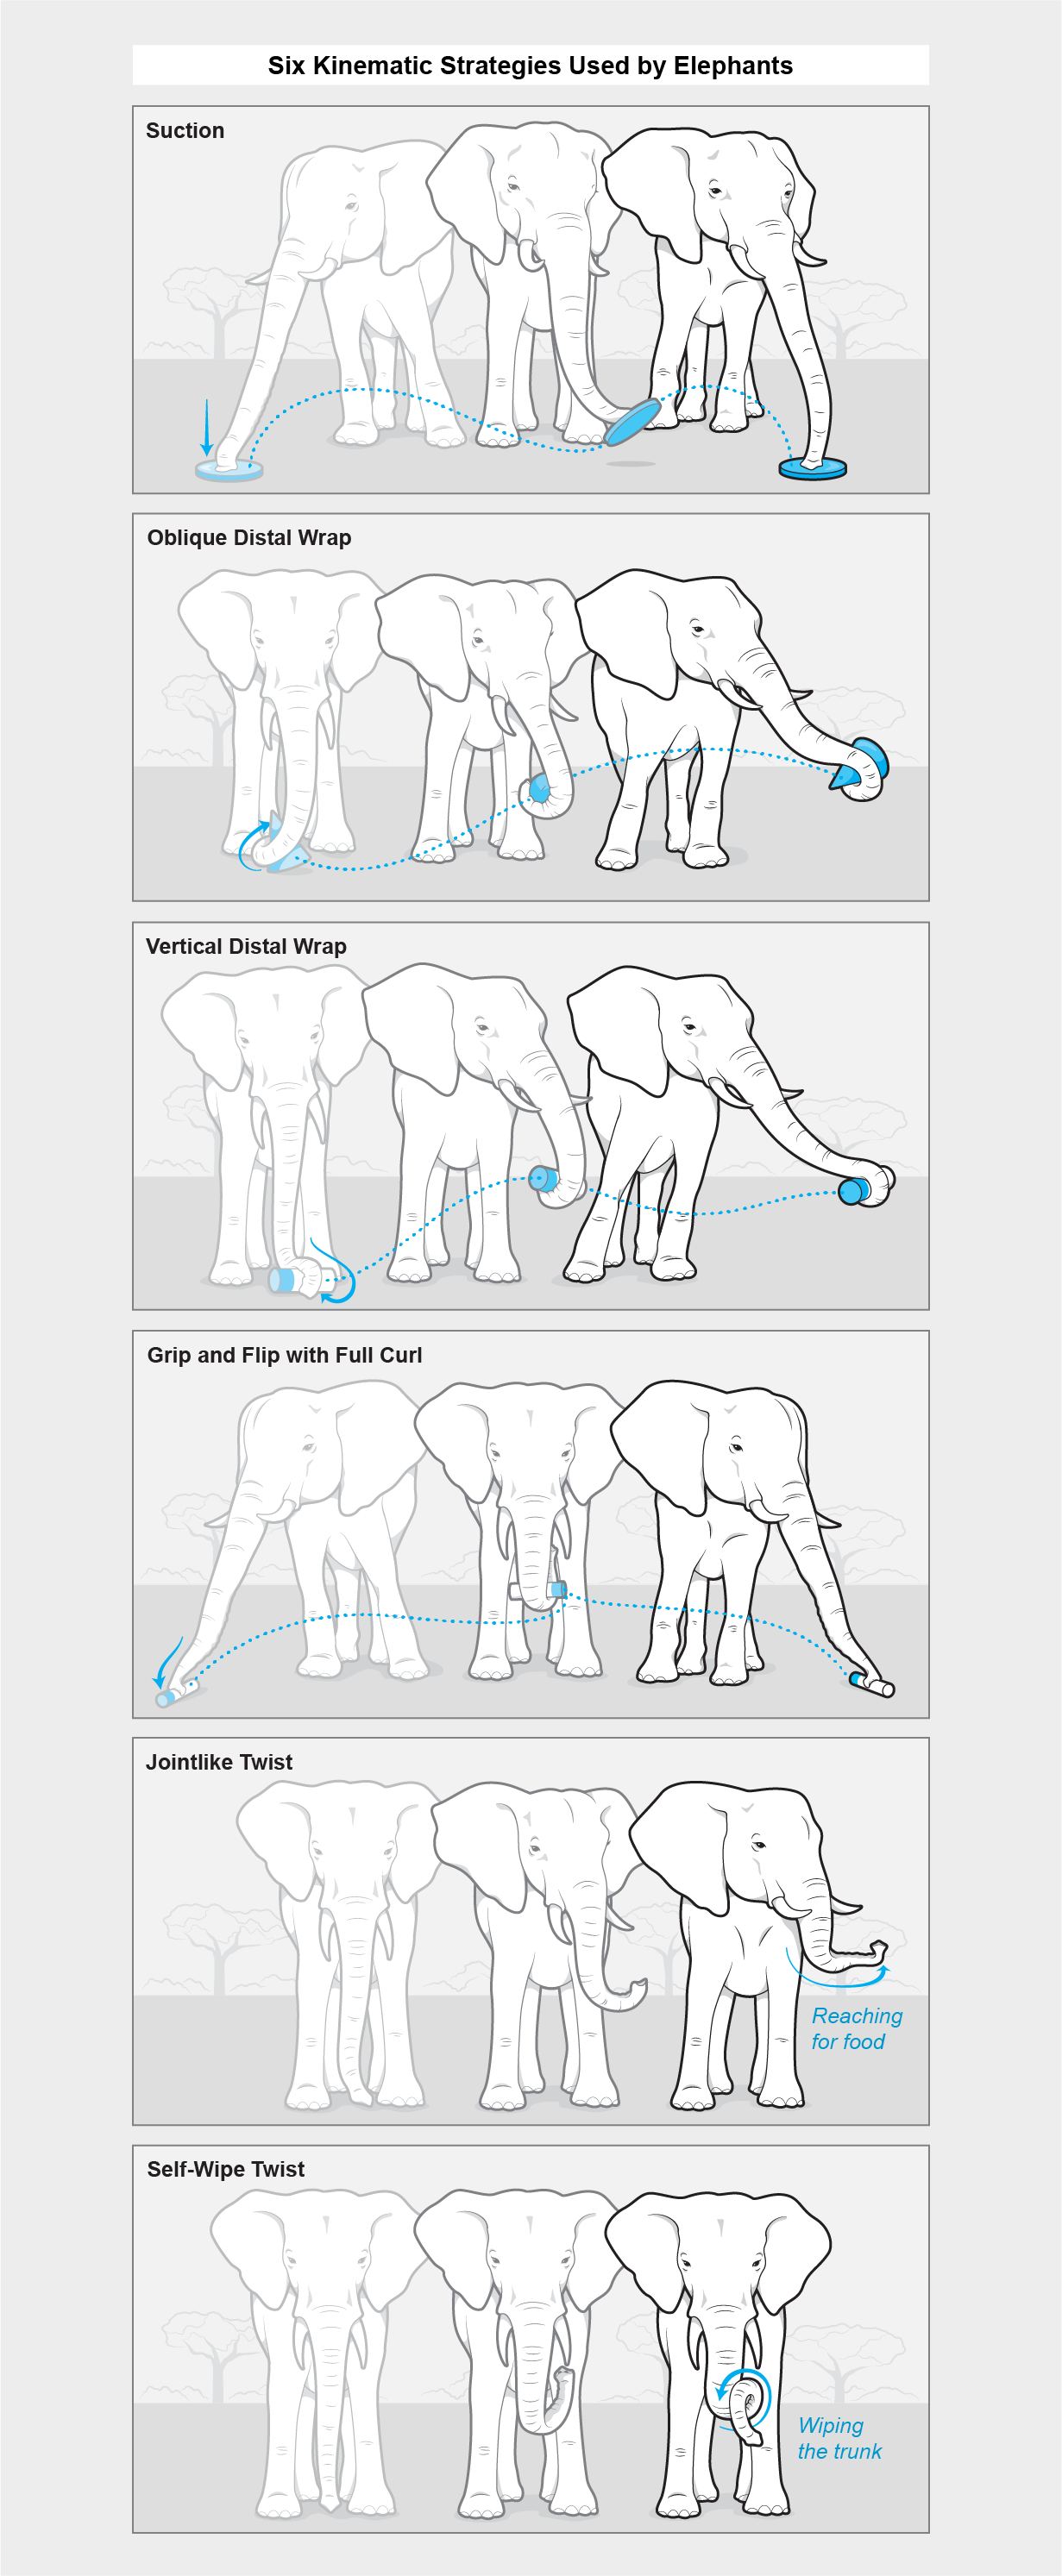 Graphic shows various ways an elephant can use its trunk to move objects or perform other tasks such as reaching for food.